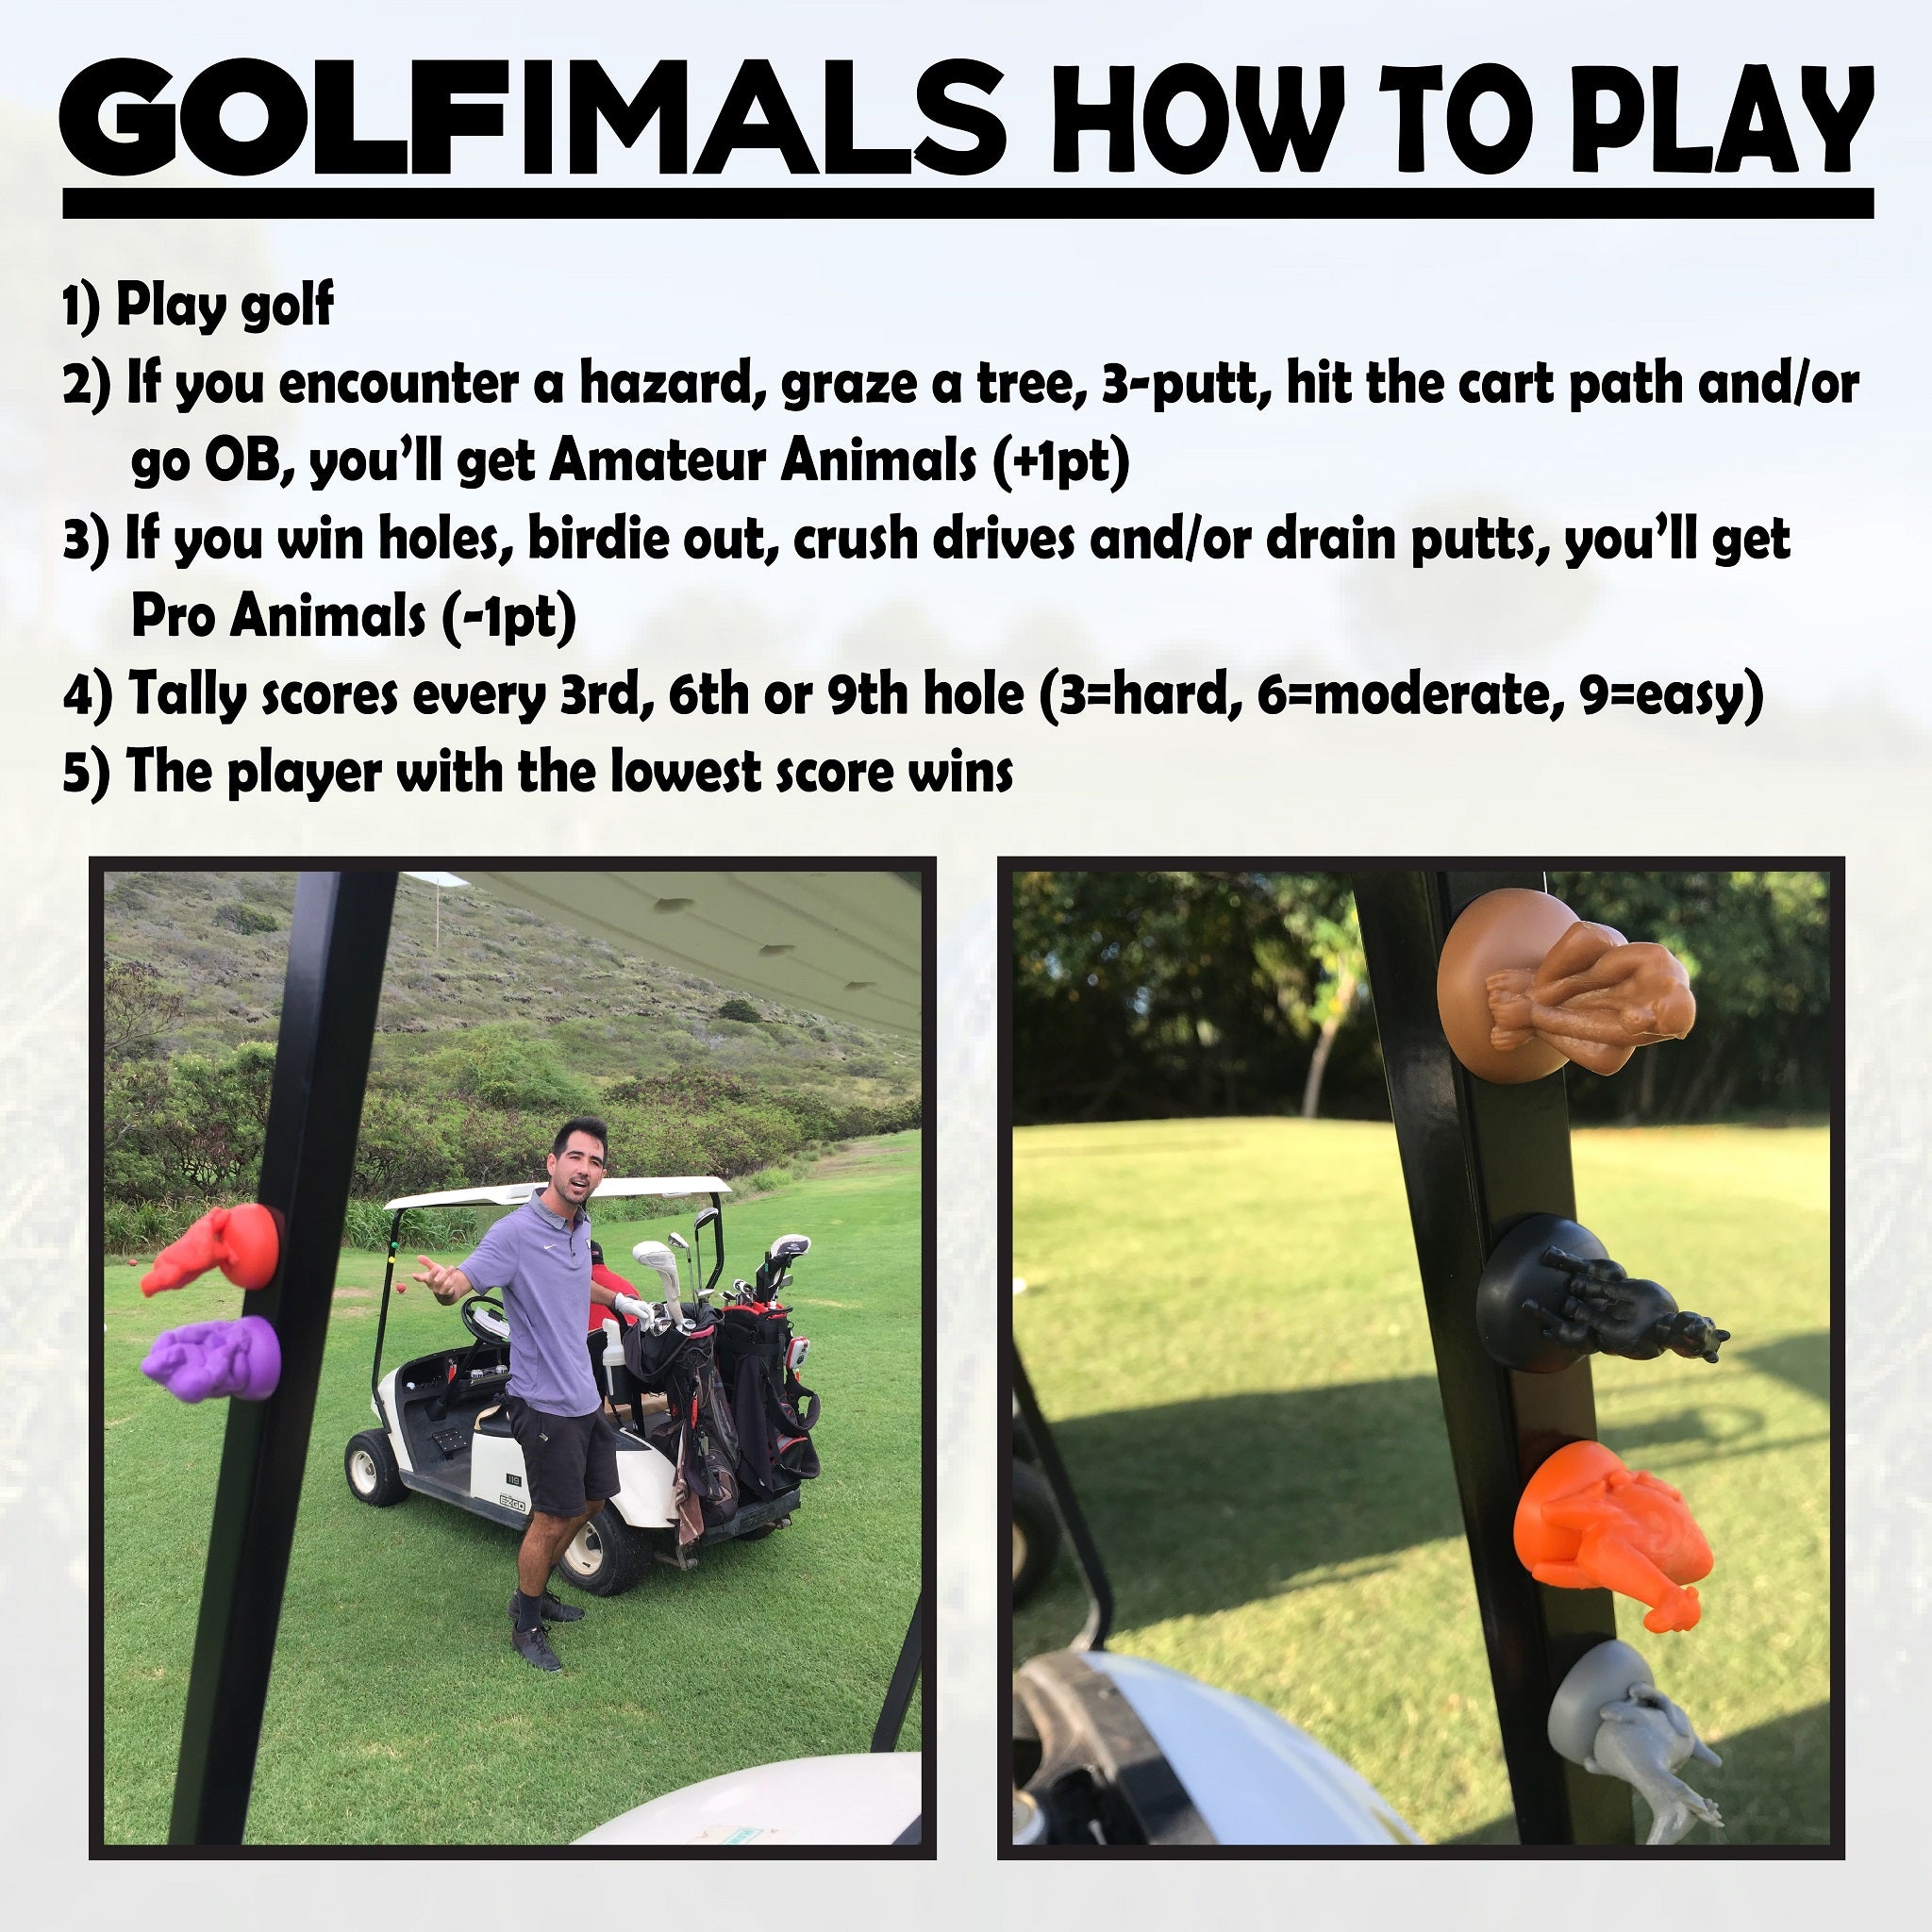 GOLFimals Lion - King of the Hole